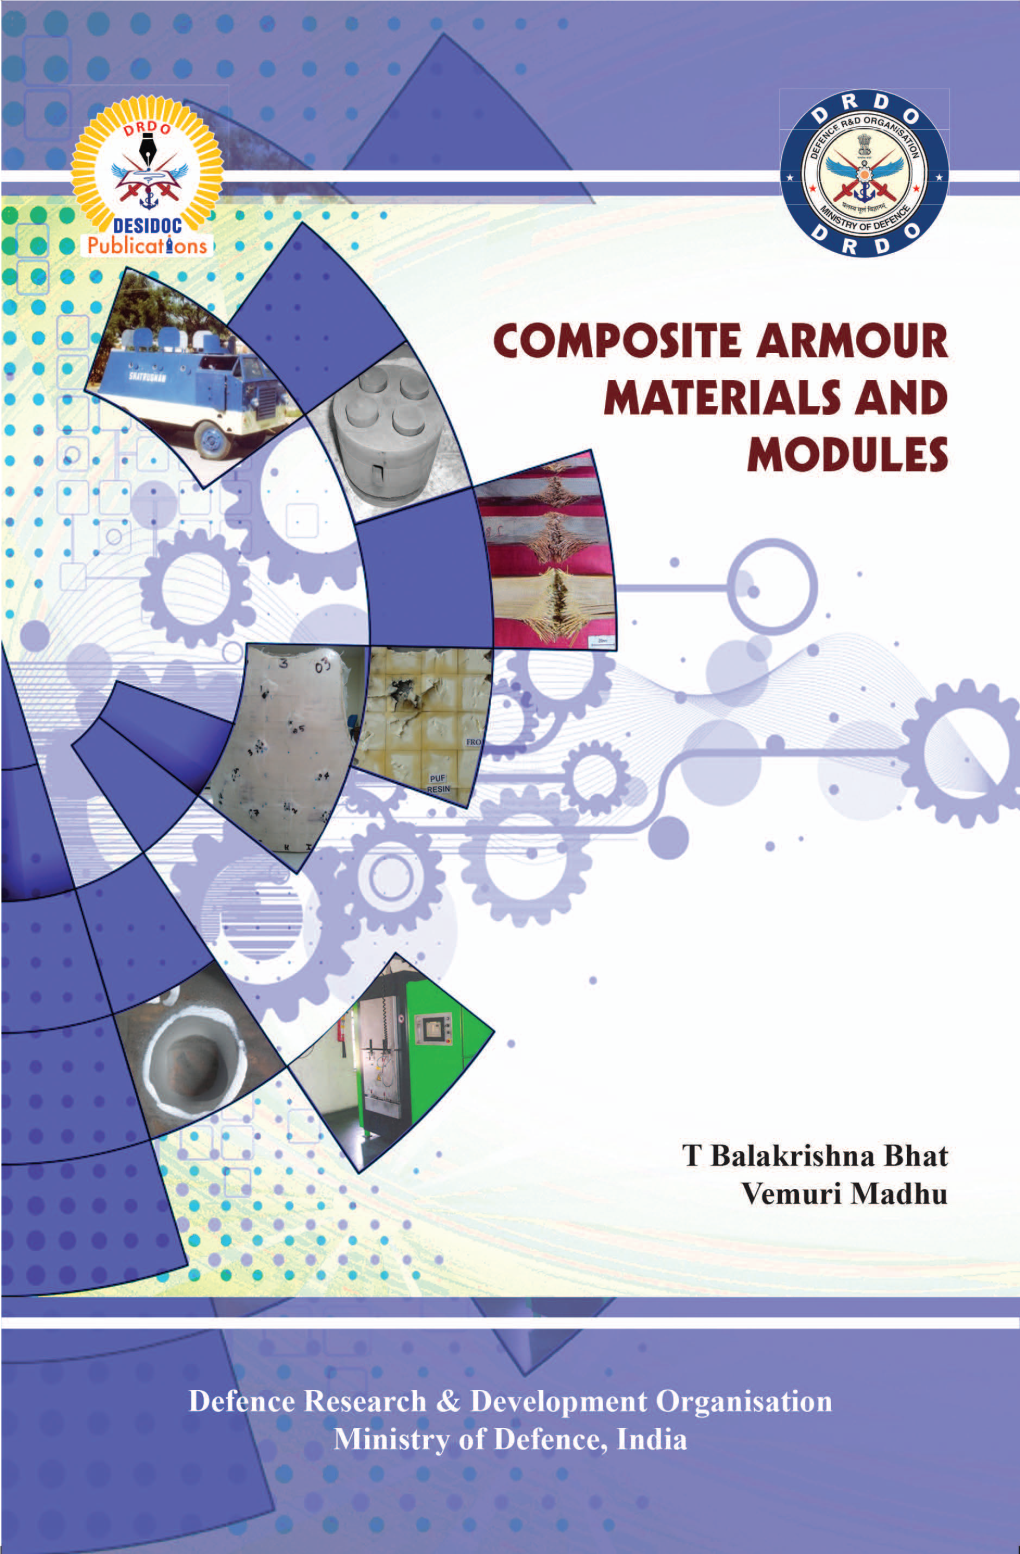 Composite Armour Materials and Modules Composite Armour Materials and Modules